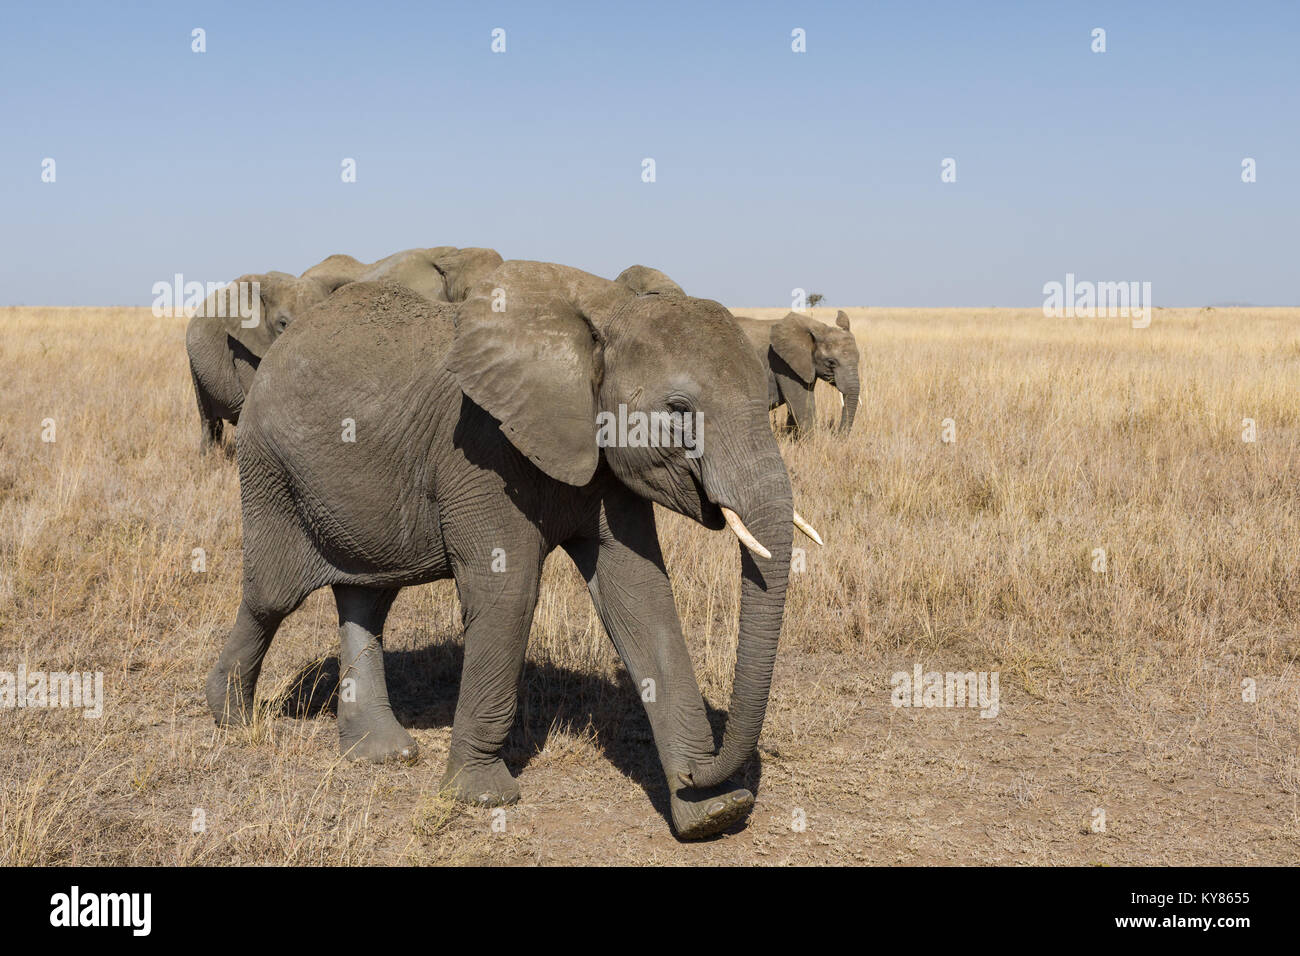 Big herd of elephants with youngsters and babies marching trough savanna, October 2017, Serengeti National Park, Tanzania, Africa Stock Photo